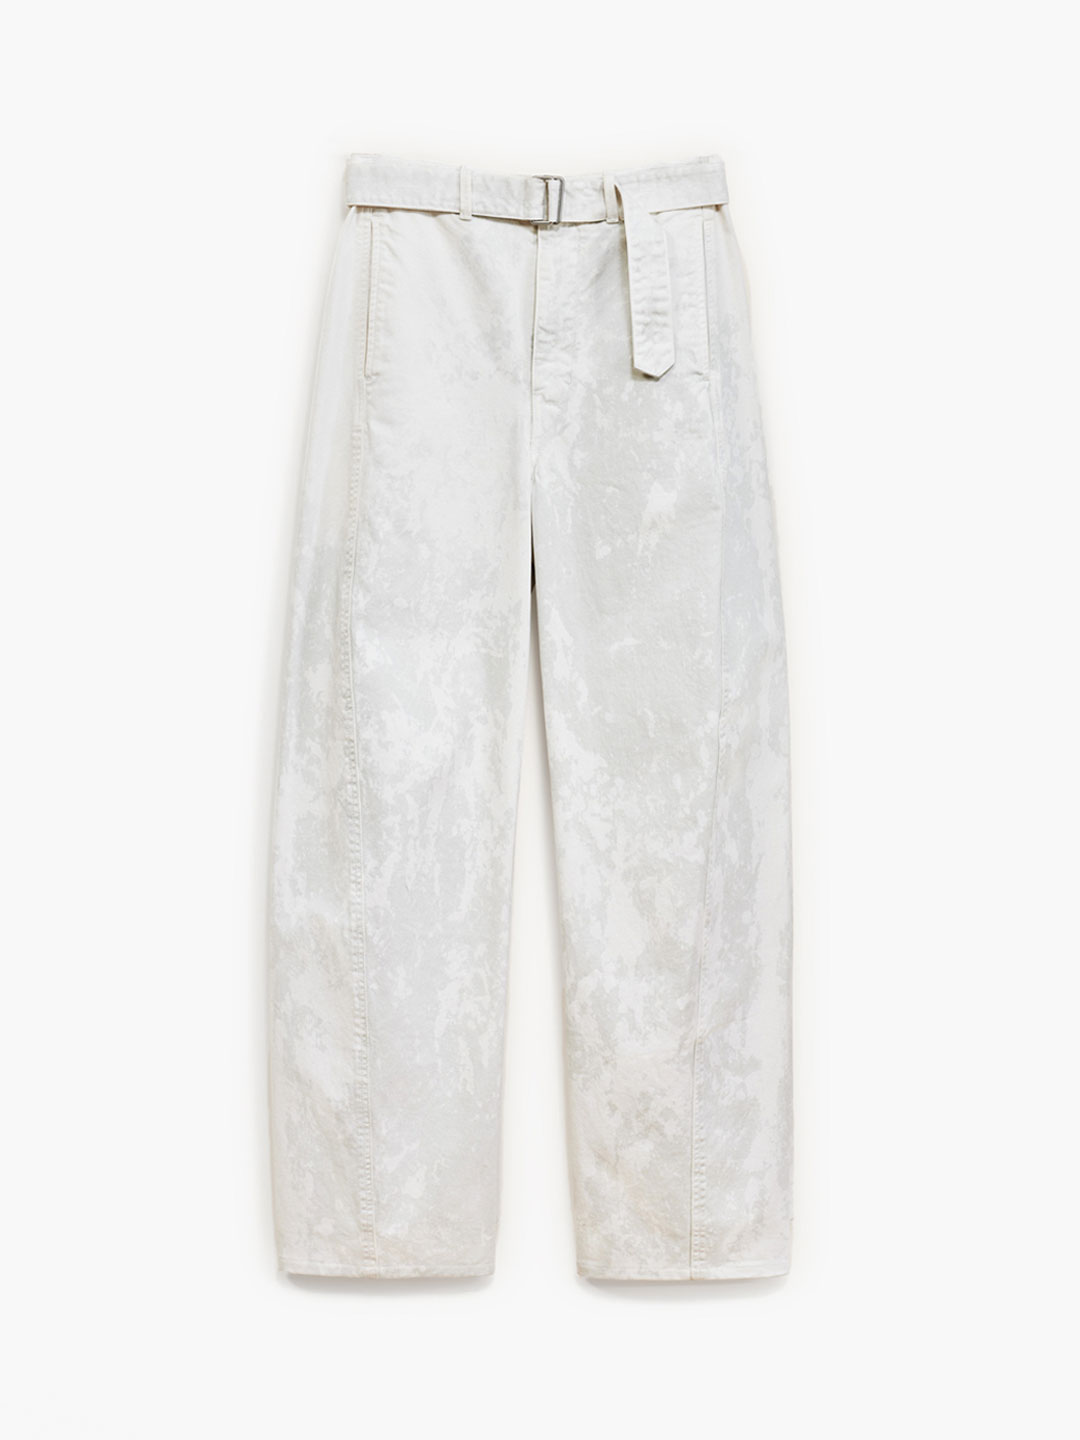 Twisted Belted Pants - Light Gray